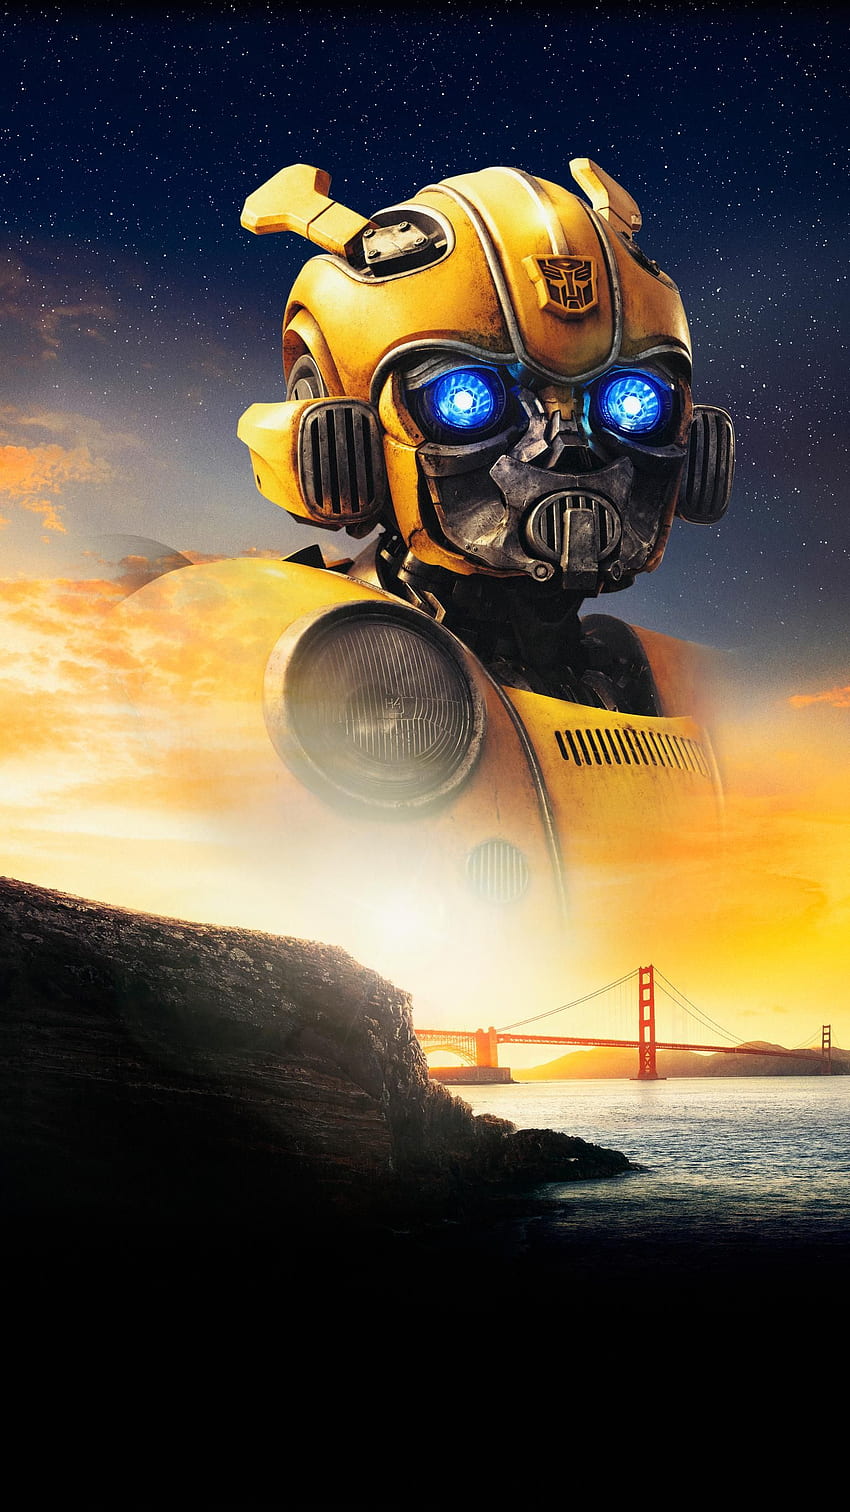 The Transformer Bumblebee Standing In A Scene From The Film Background  Pictures Of Transformers Background Image And Wallpaper for Free Download